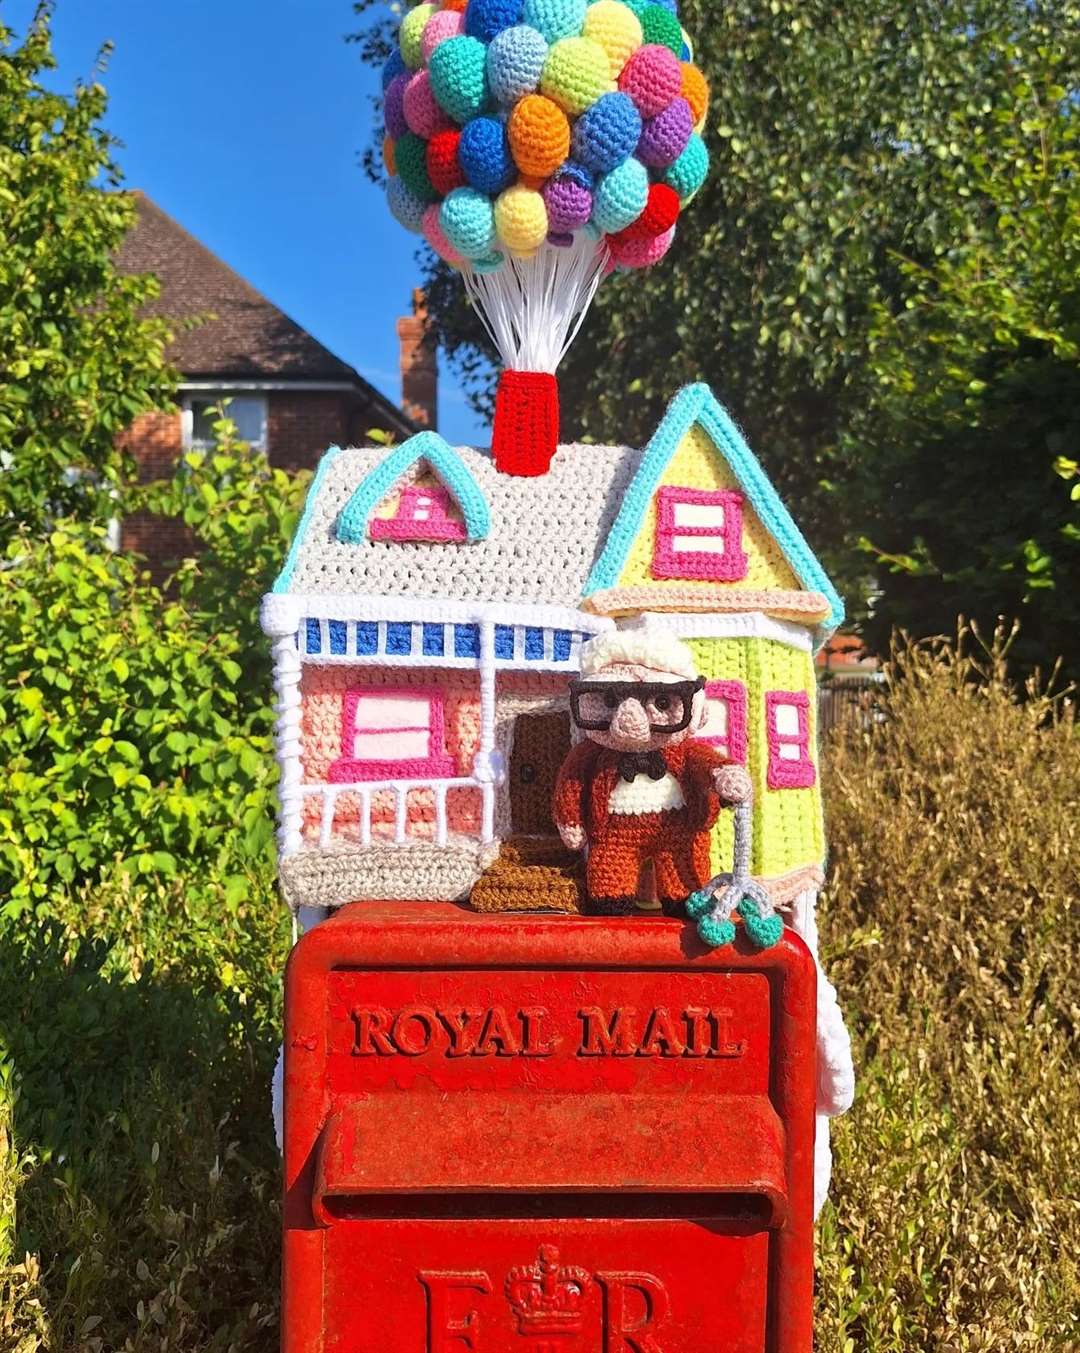 Sarah Simpson’s crocheted version of the balloon house in Up (Sarah Simpson/PA)